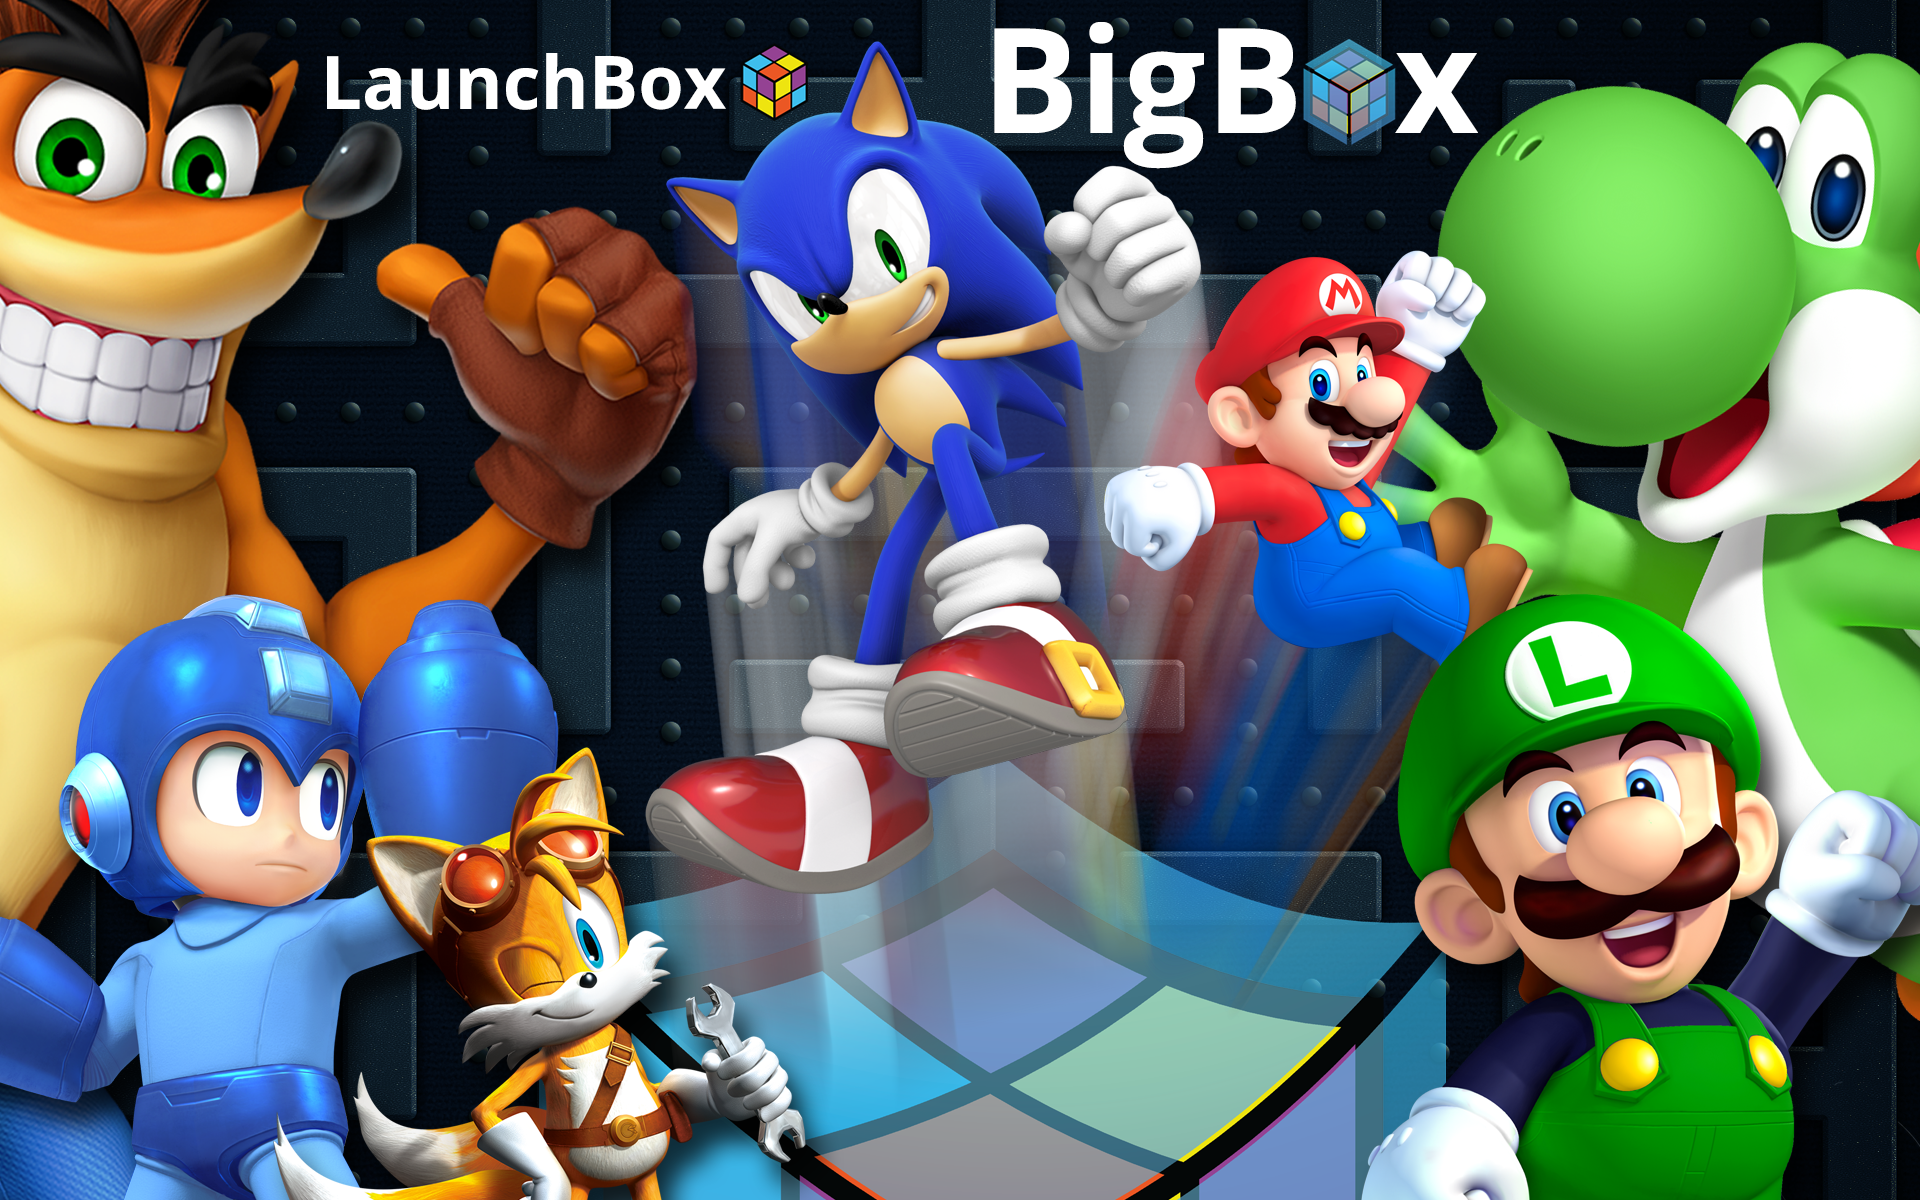 More information about "LaunchBox Wallpapers"